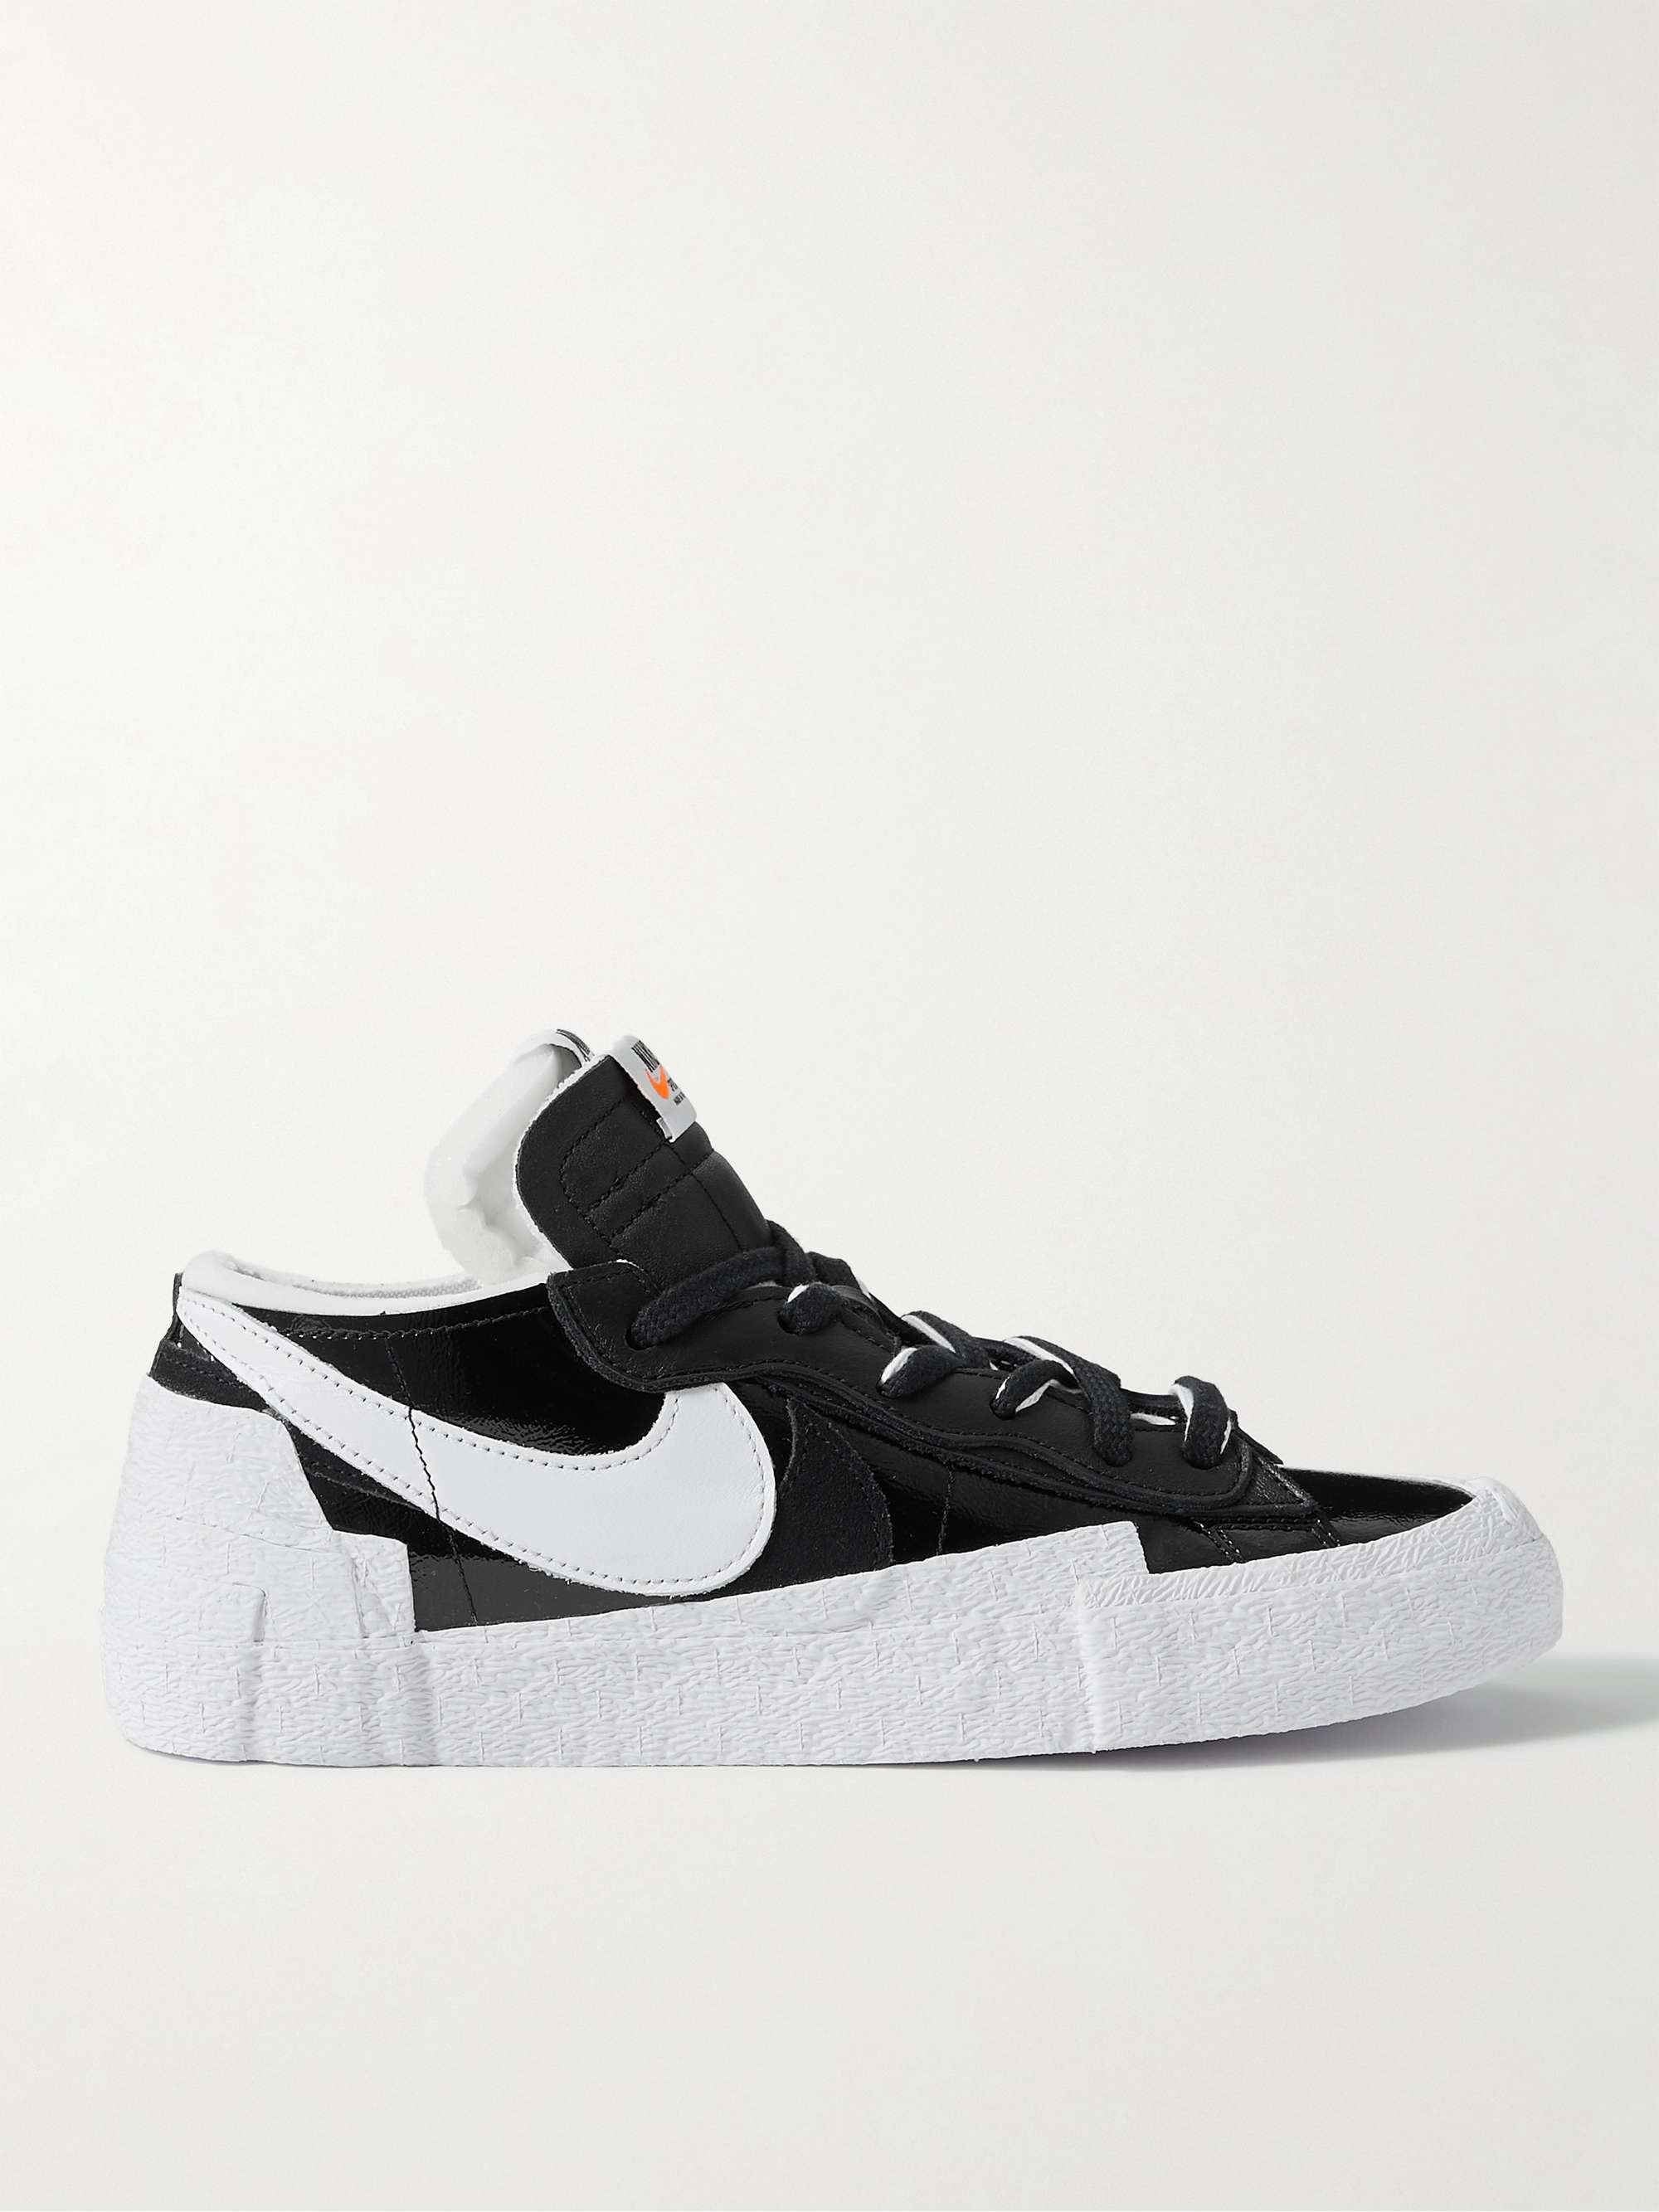 NIKE + Sacai Blazer Low Suede-Trimmed Leather Sneakers | MR PORTER